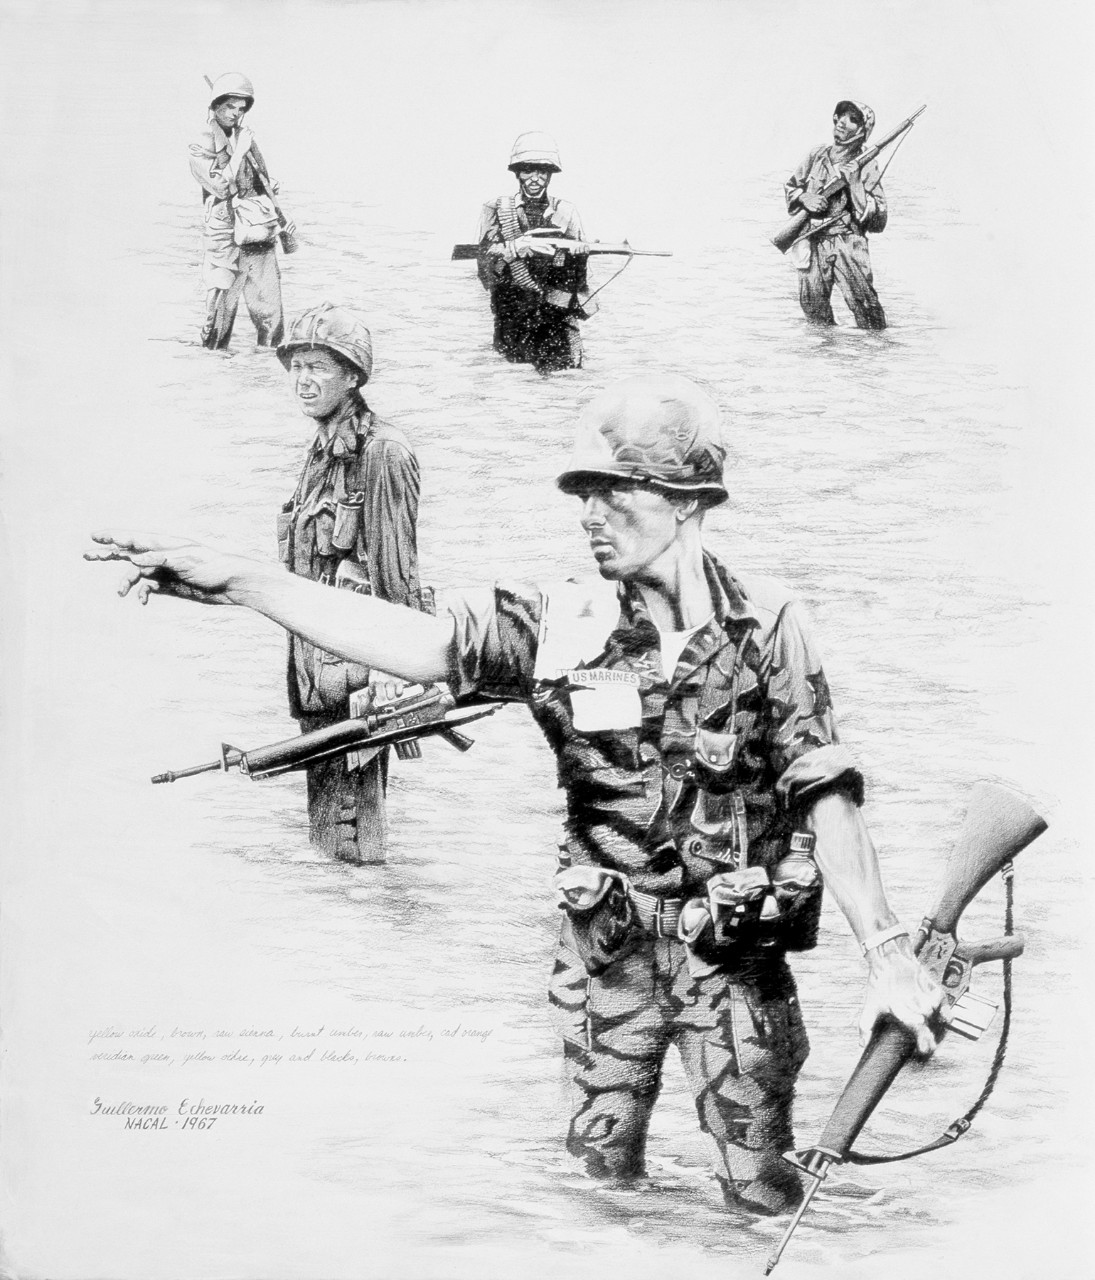 A Marine Corp patrol moving through shallow water